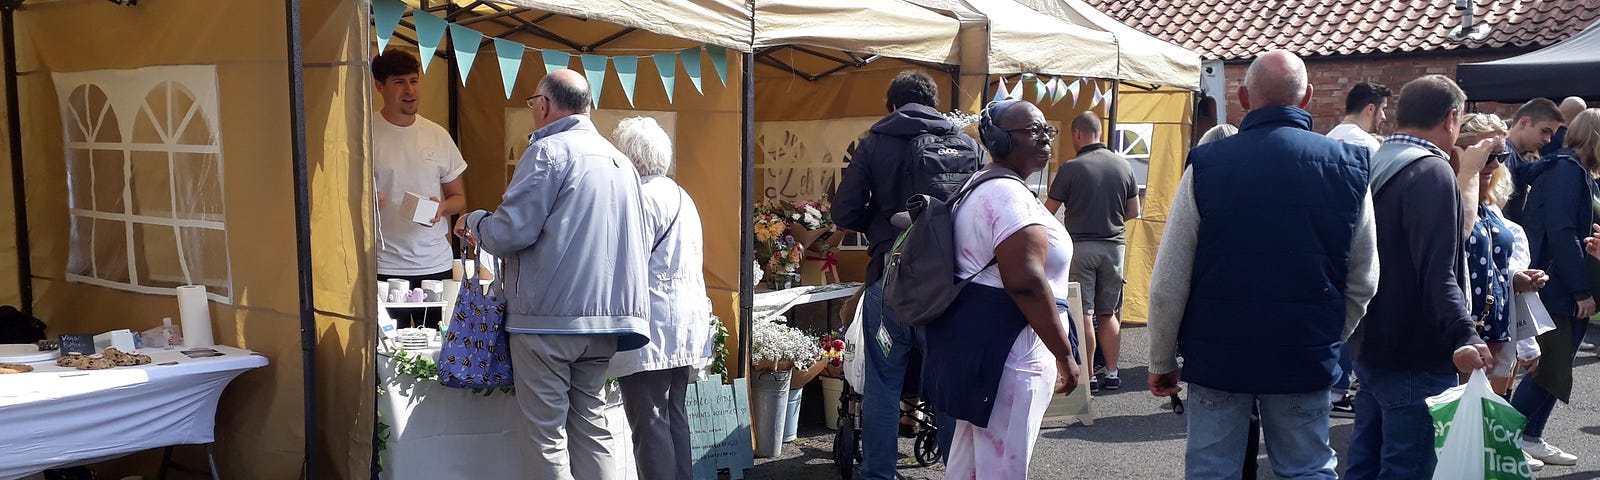 Millstream Square Street Food and Artisan Market in Sleaford